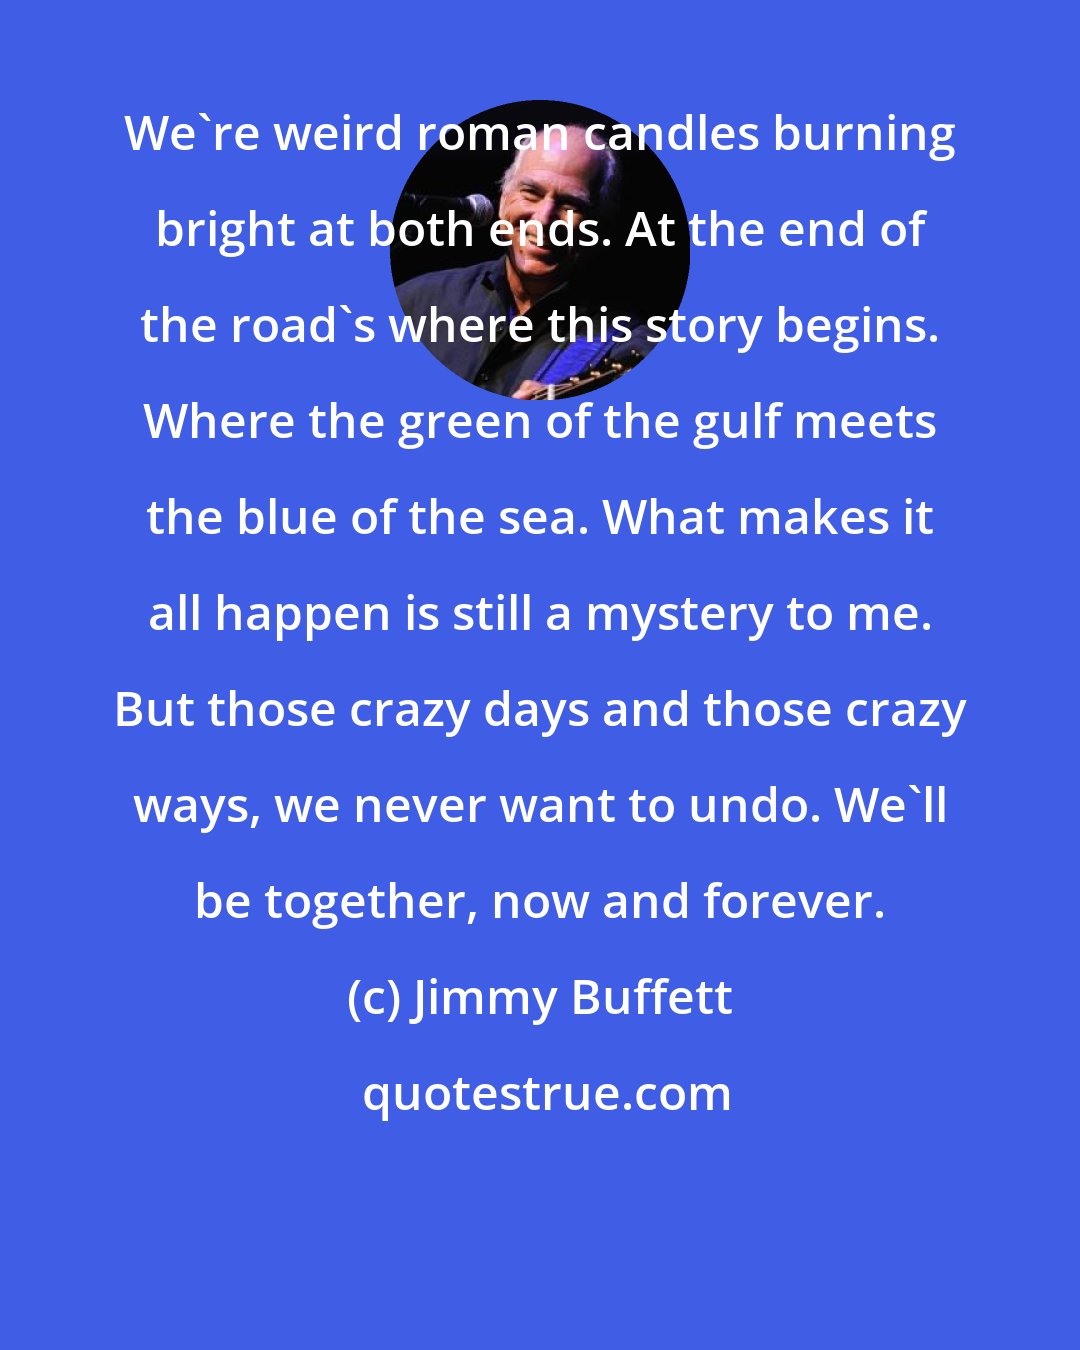 Jimmy Buffett: We're weird roman candles burning bright at both ends. At the end of the road's where this story begins. Where the green of the gulf meets the blue of the sea. What makes it all happen is still a mystery to me. But those crazy days and those crazy ways, we never want to undo. We'll be together, now and forever.